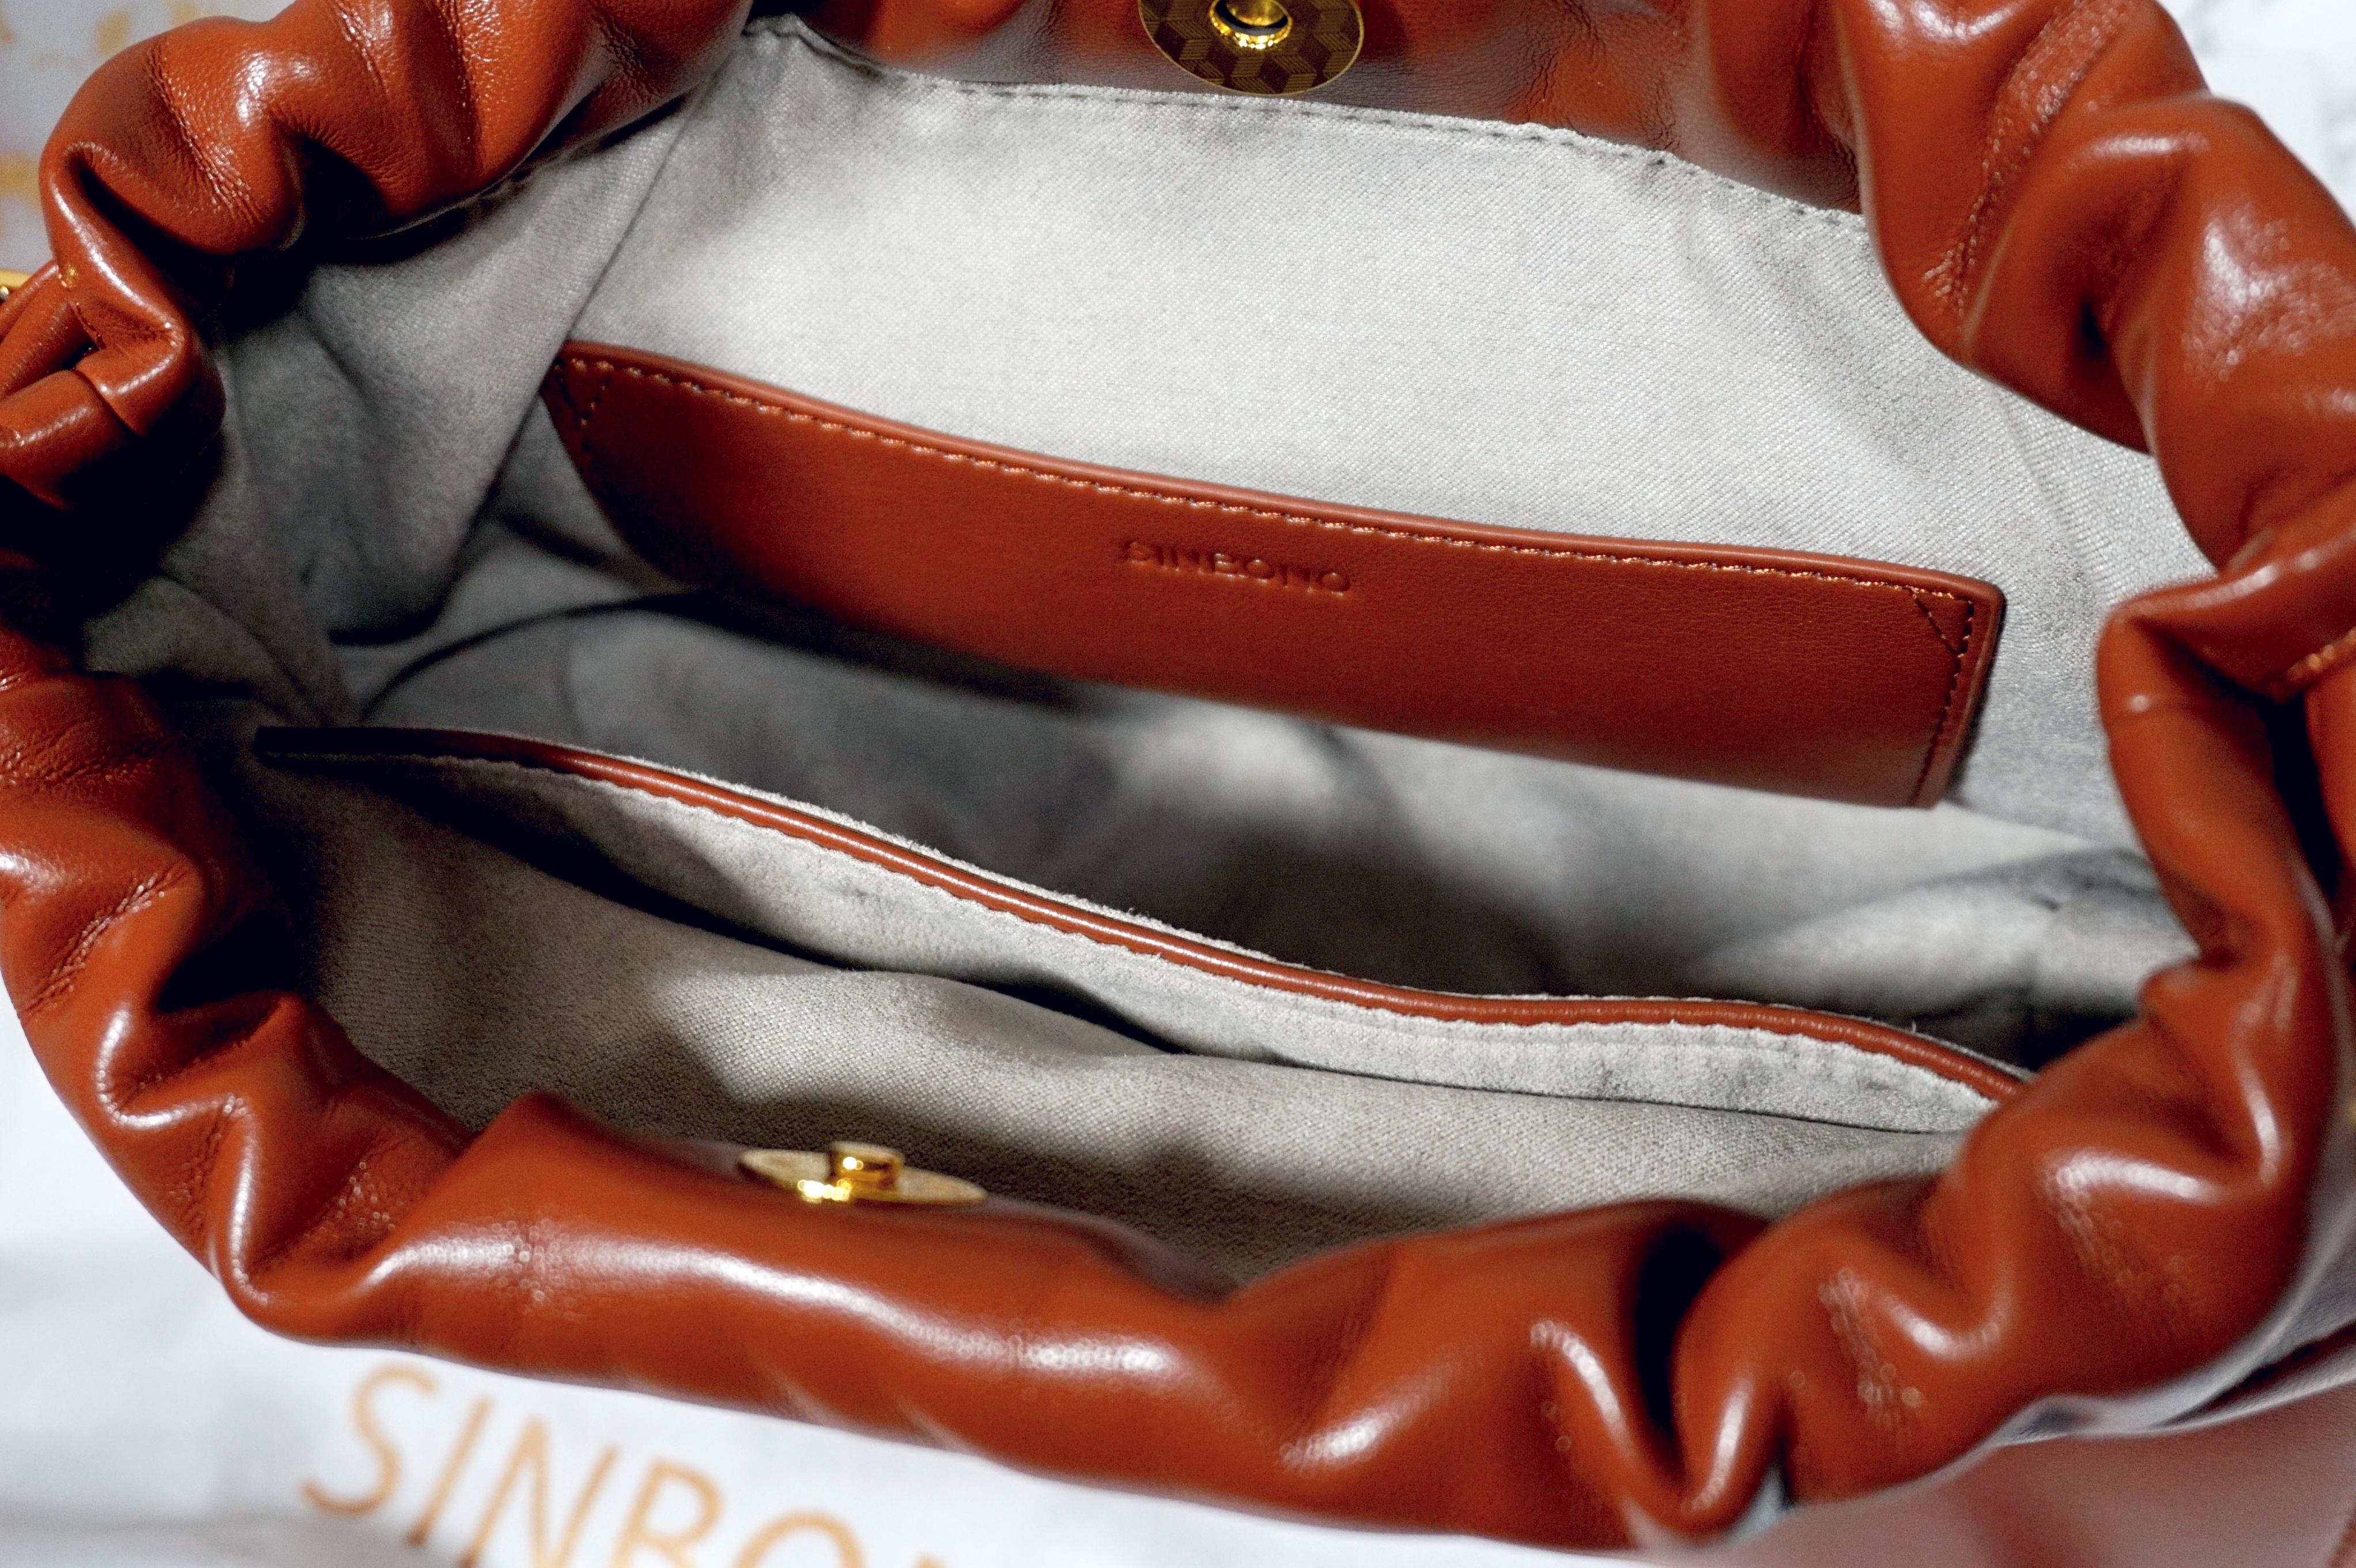 SINBONO Bags & Accessories Review